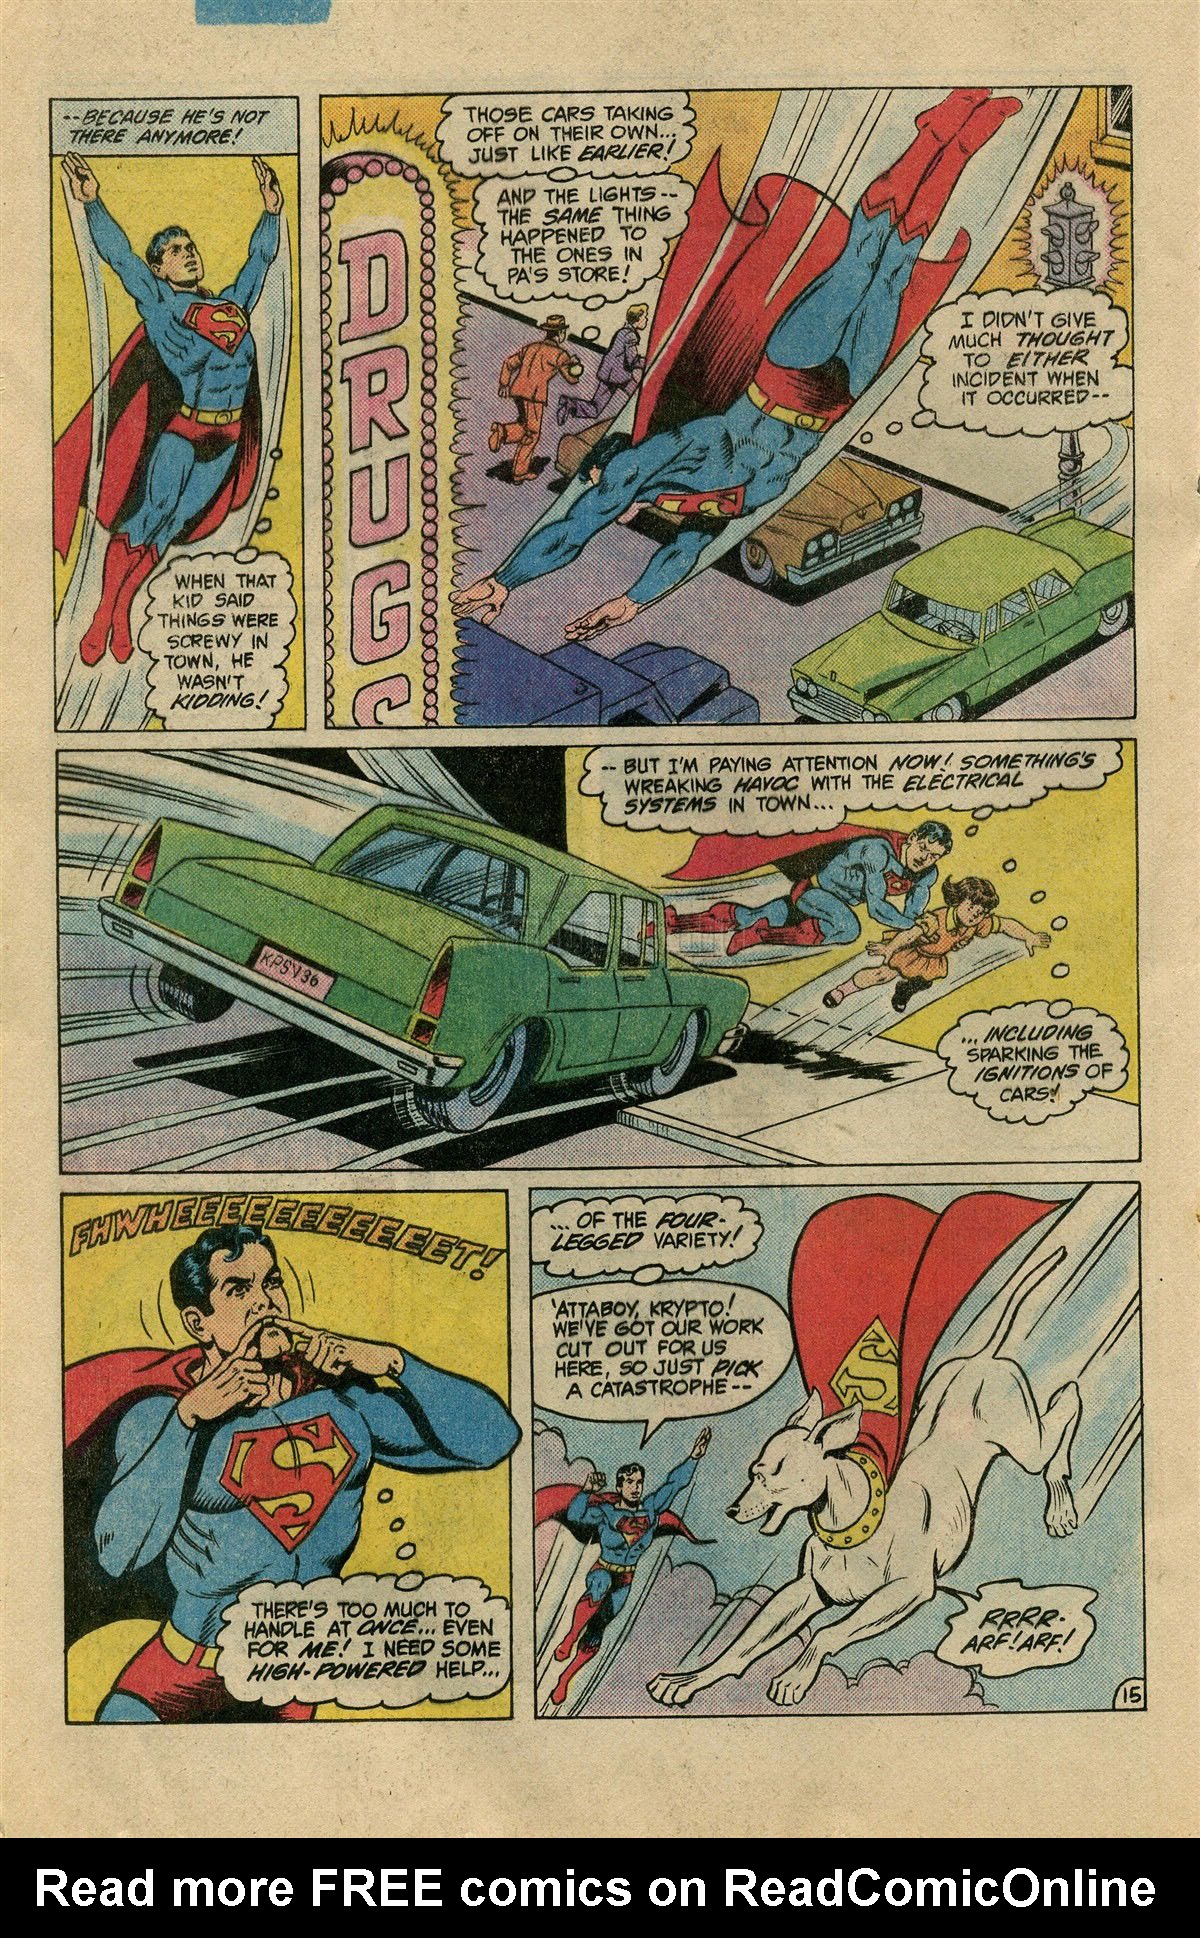 The New Adventures of Superboy 52 Page 18